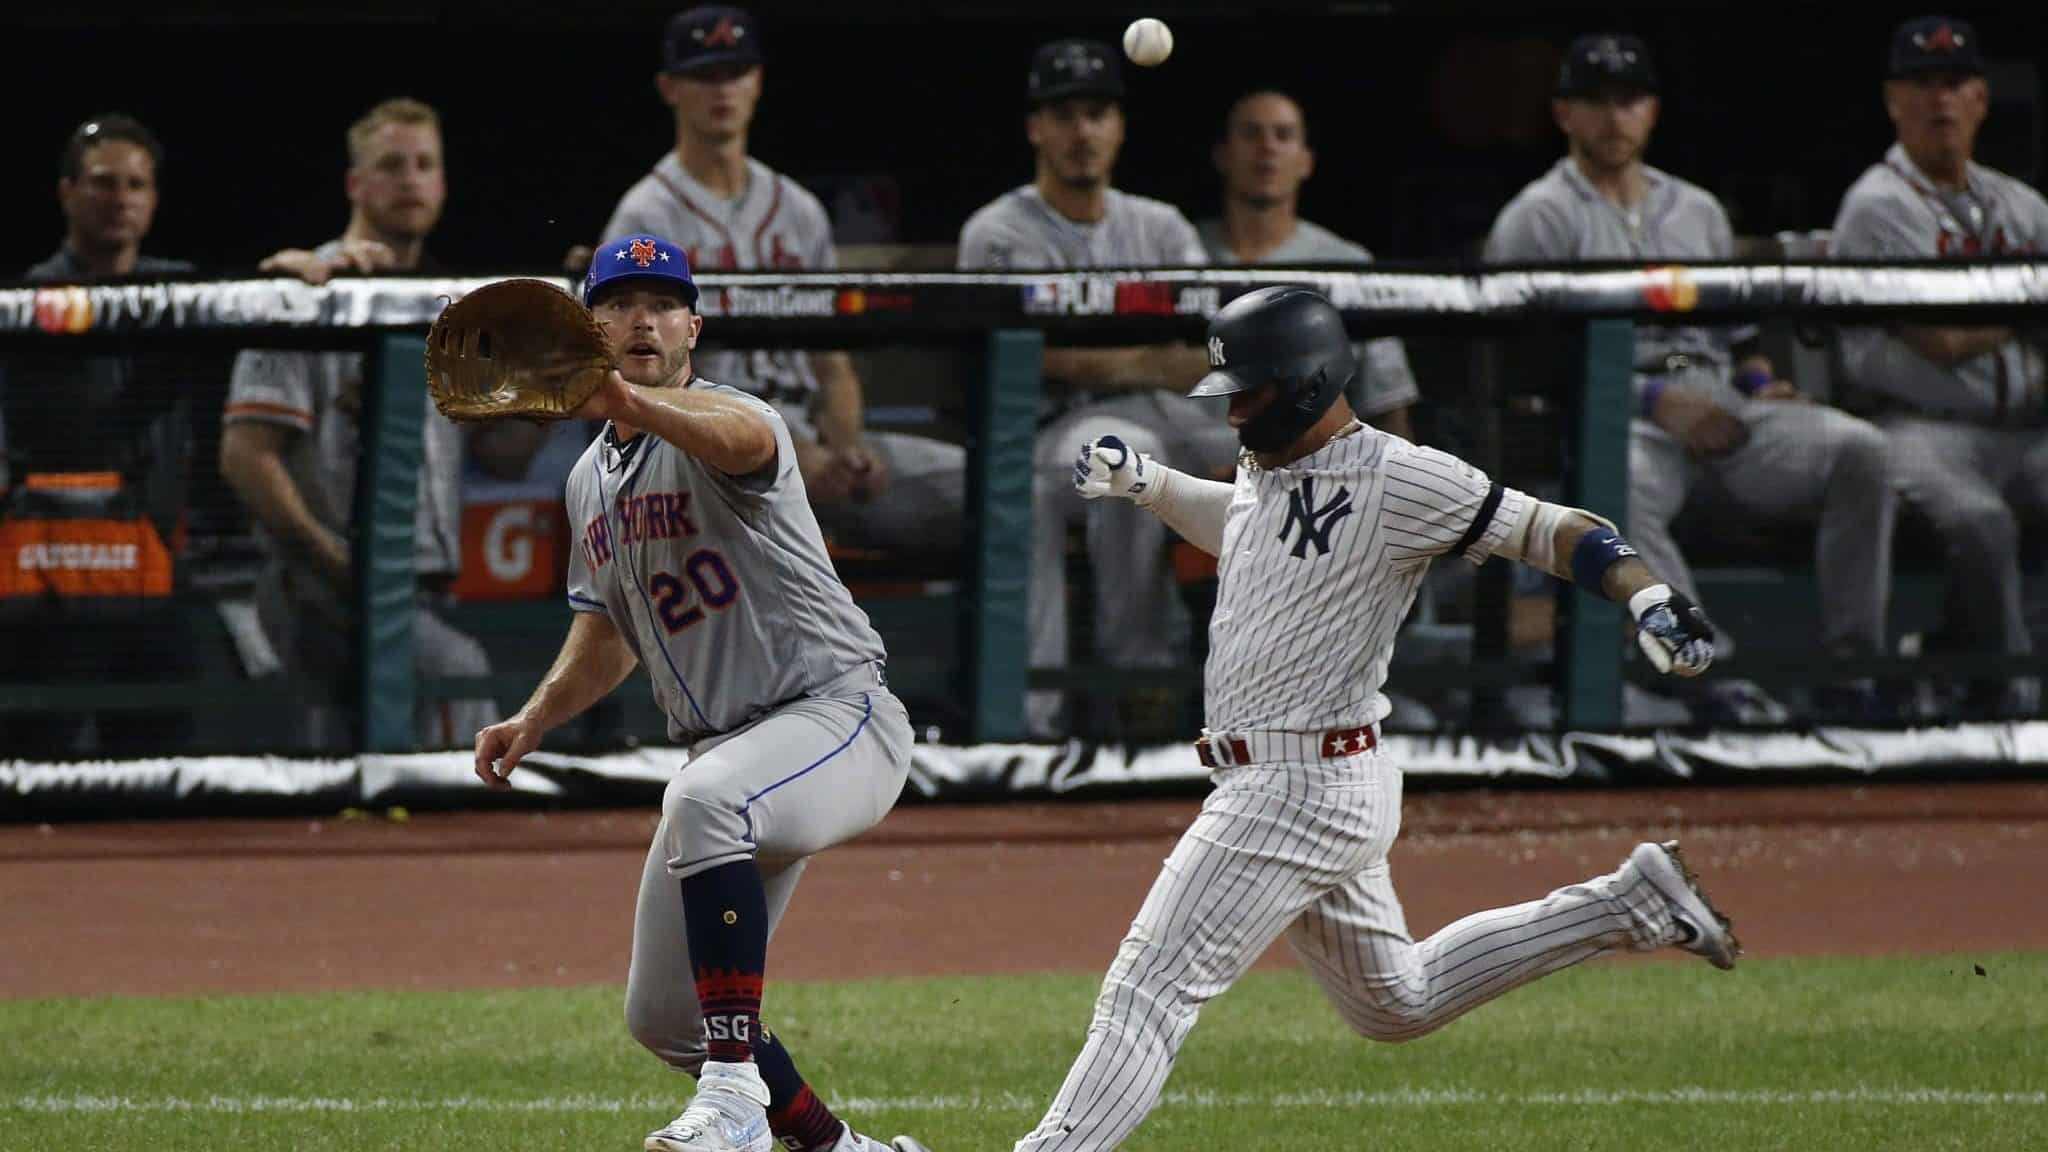 CLEVELAND, OHIO - JULY 09: Pete Alonso #20 of the New York Mets and Gleyber Torres #25 of the New York Yankees during the 2019 MLB All-Star Game at Progressive Field on July 09, 2019 in Cleveland, Ohio.